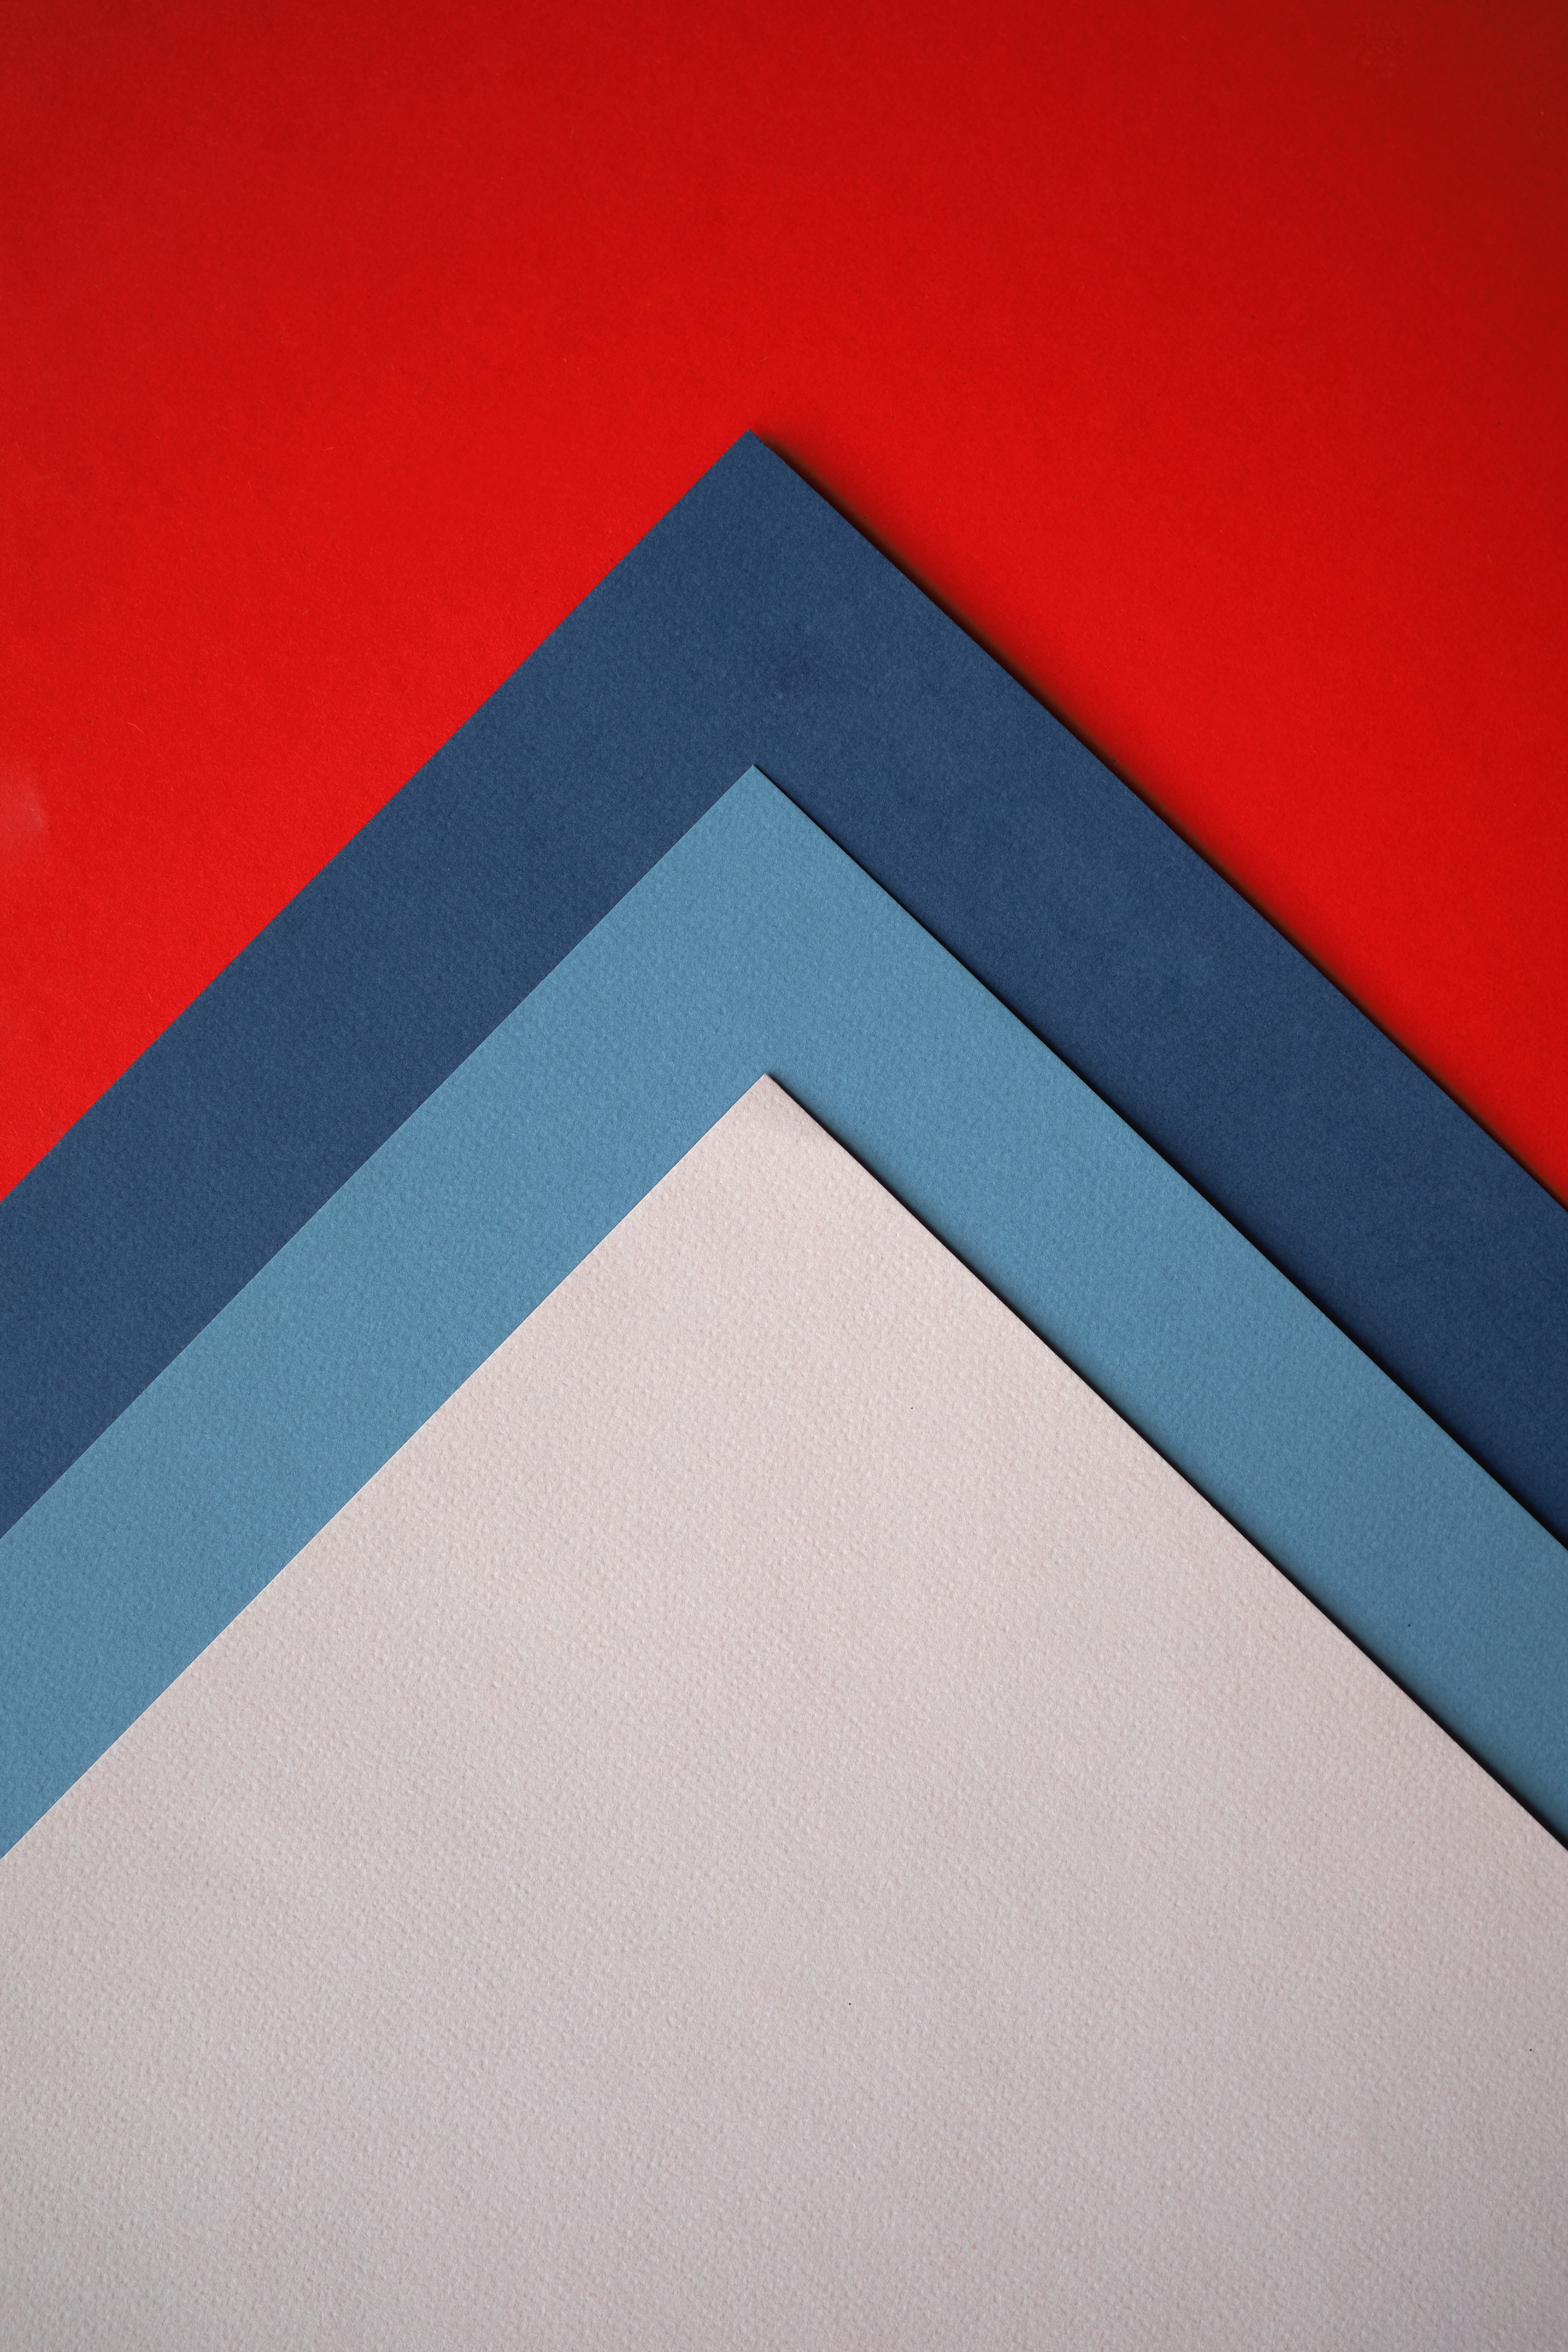 triangles, multicolored, textures, texture, paper, motley, sheets, overlay, imposition